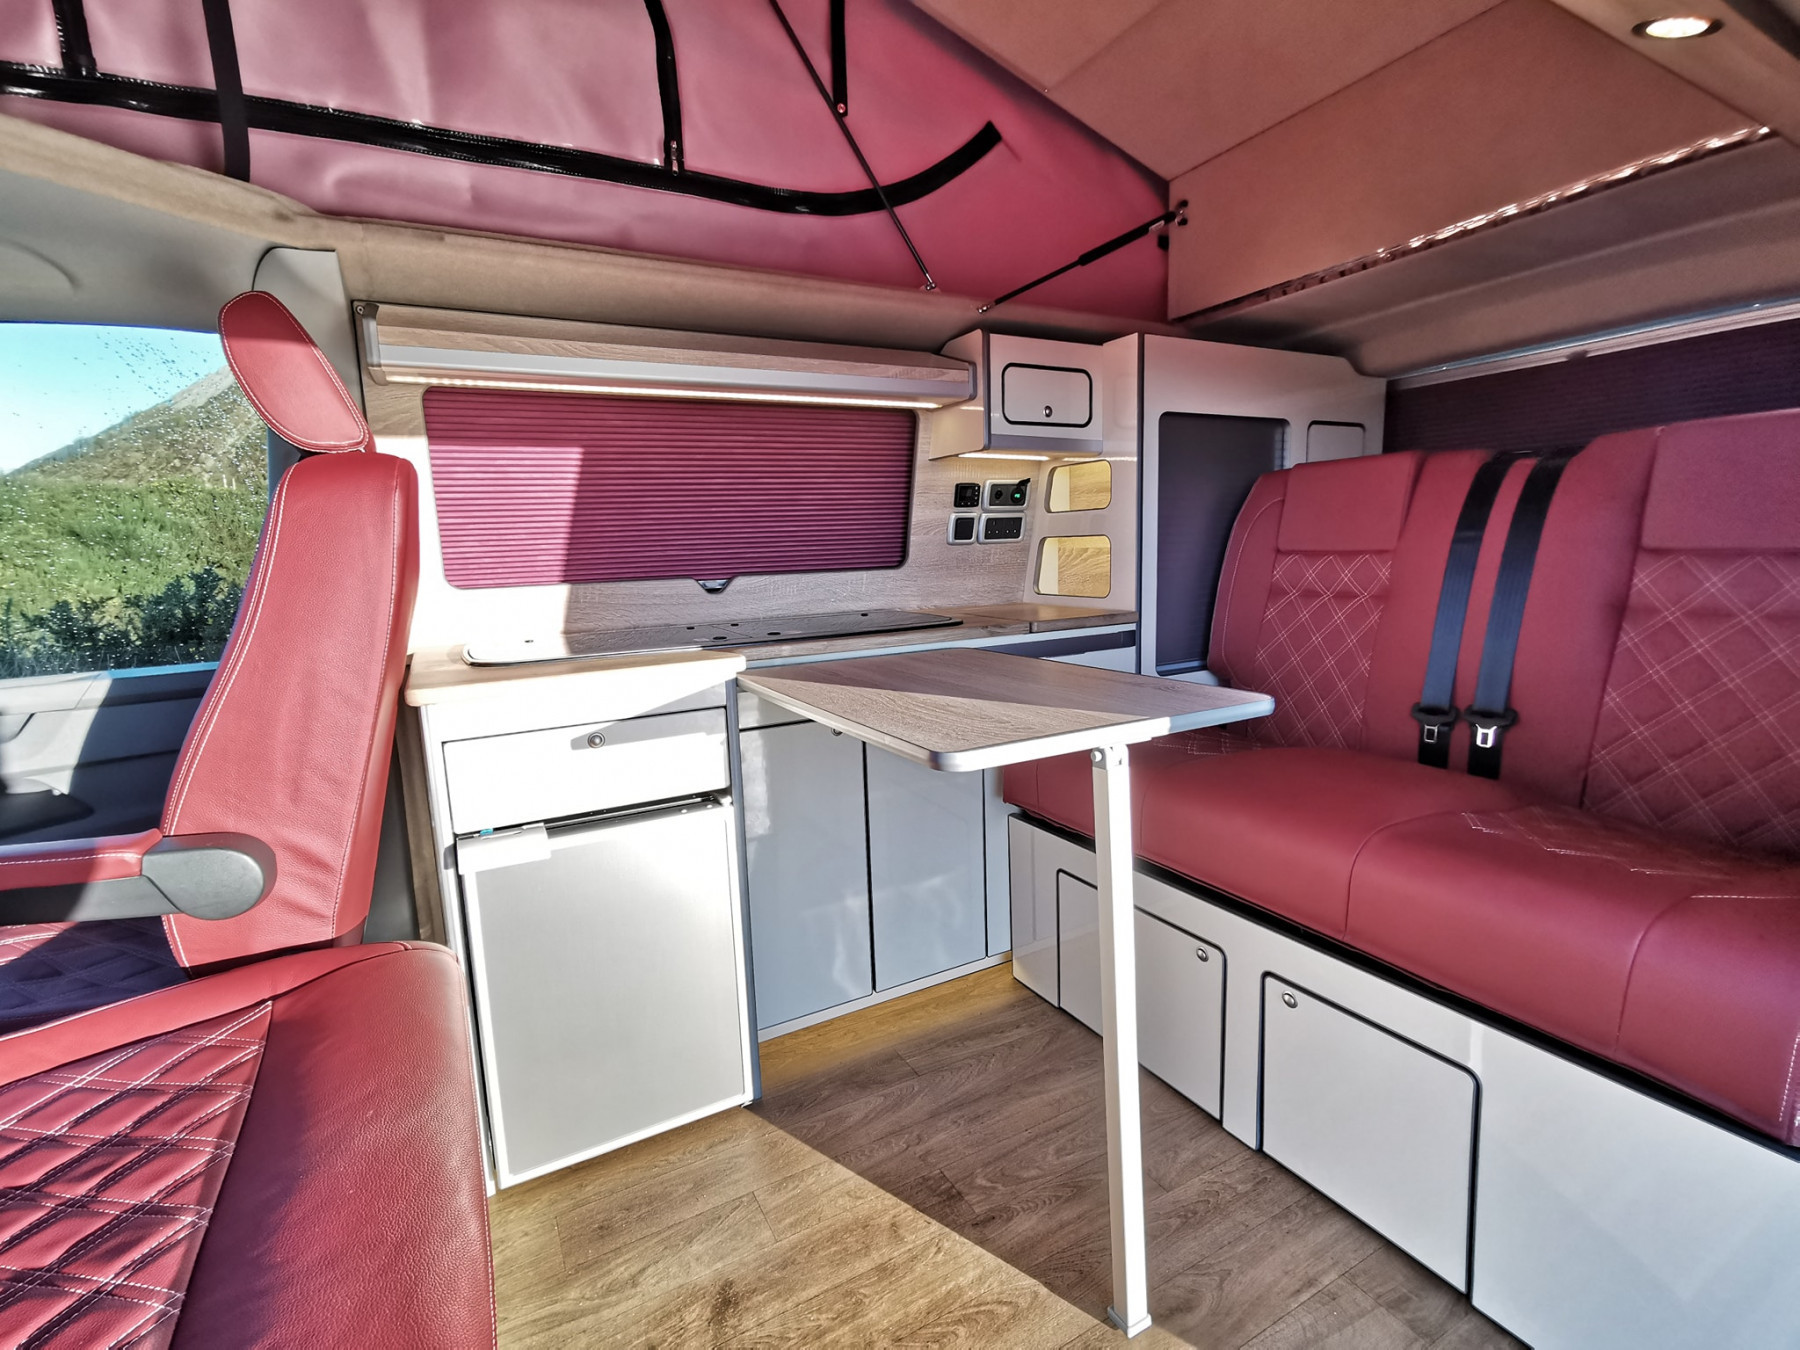 The interior of a campervan converted by Taylored Campervans